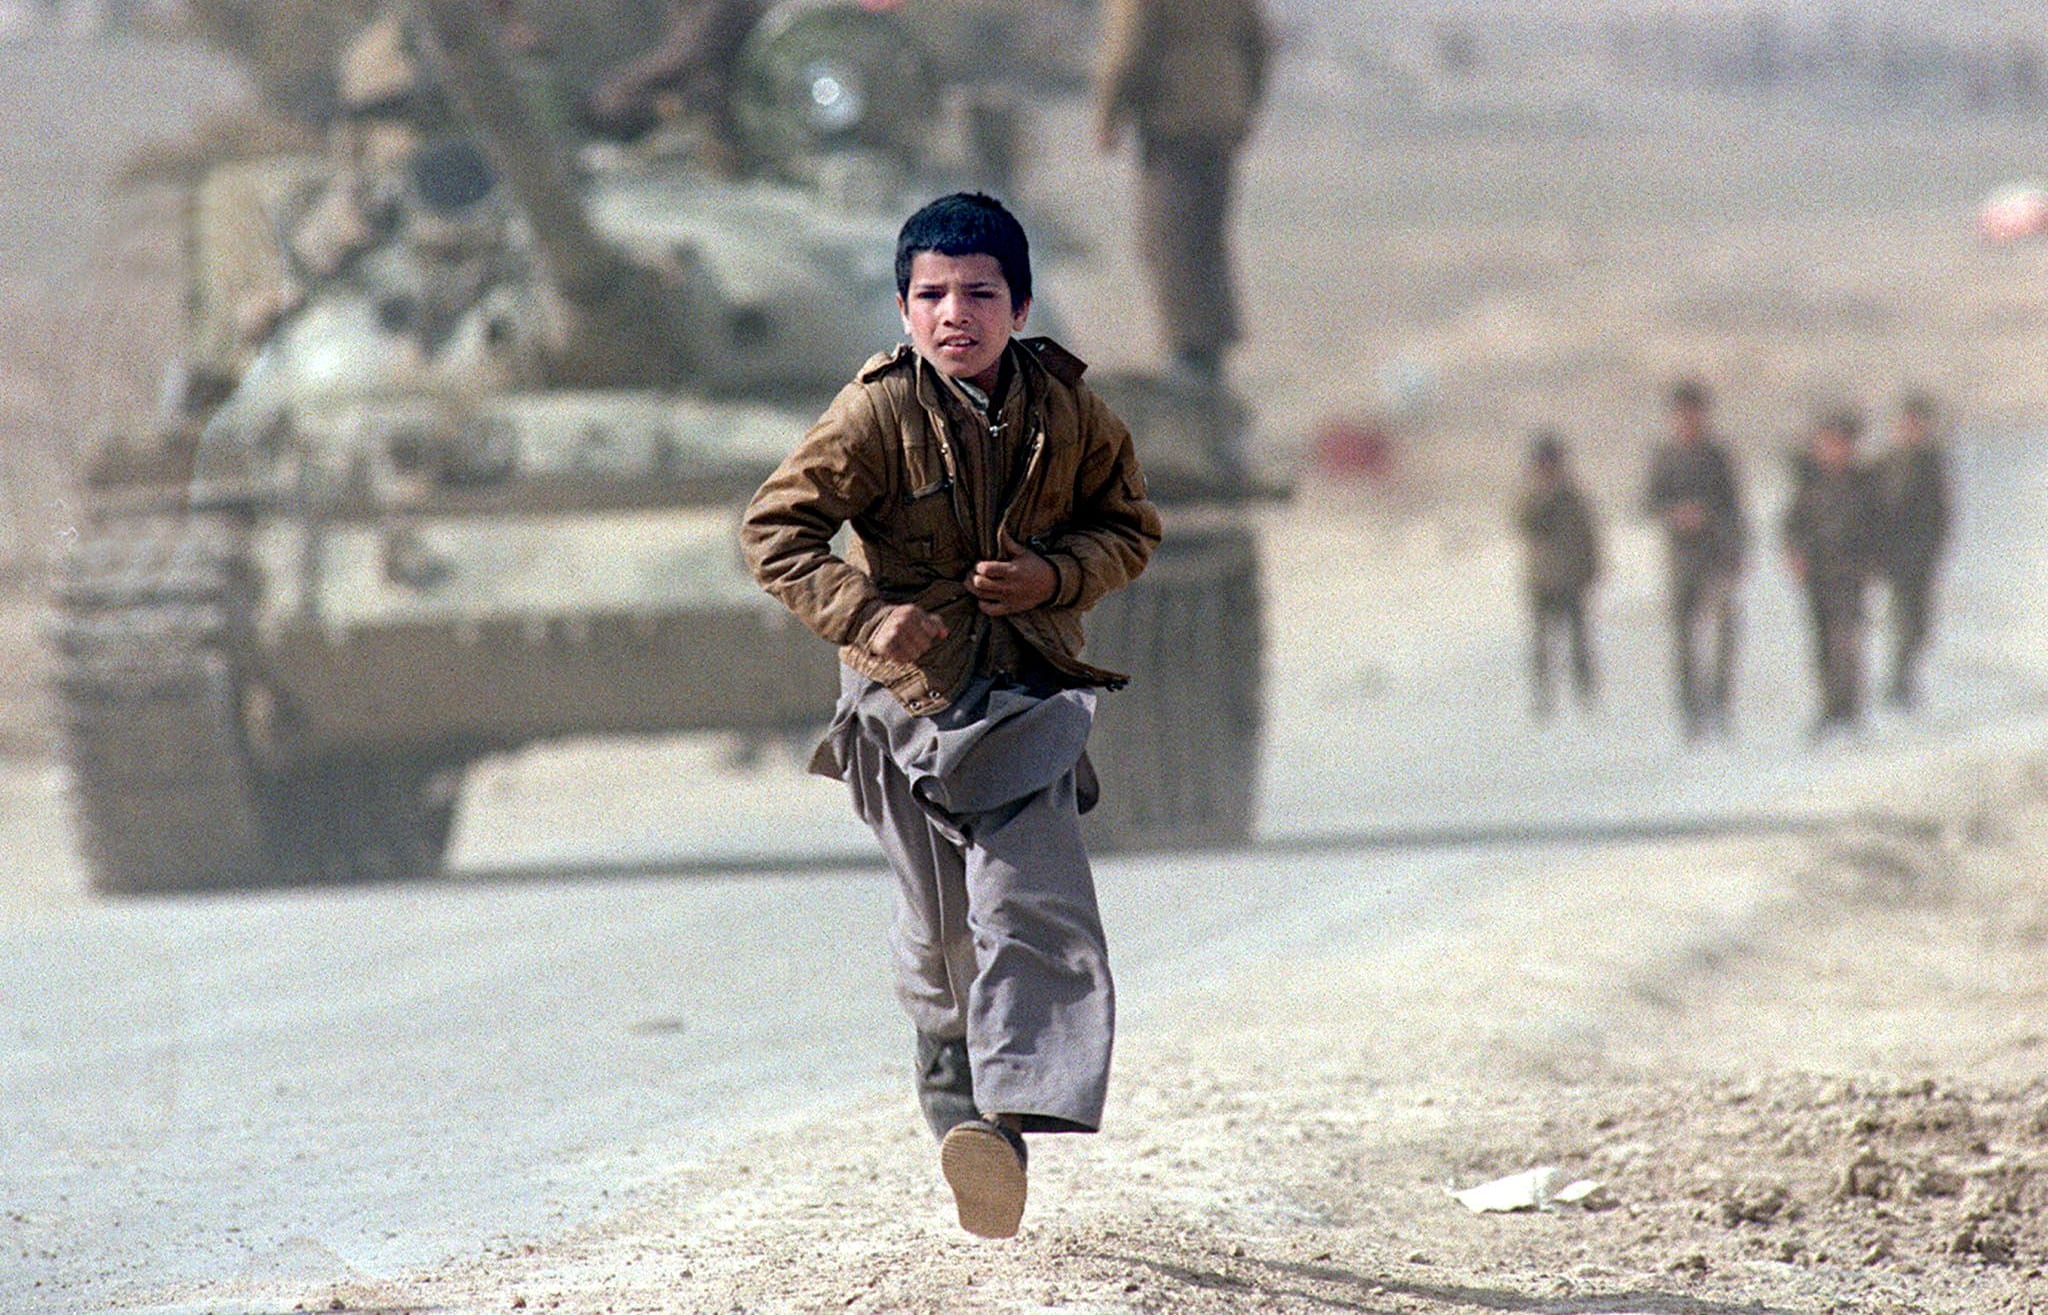 A boy runs after a bus in the Afghan capital Kabul in April 1989 as Soviet tanks patrol the streets.